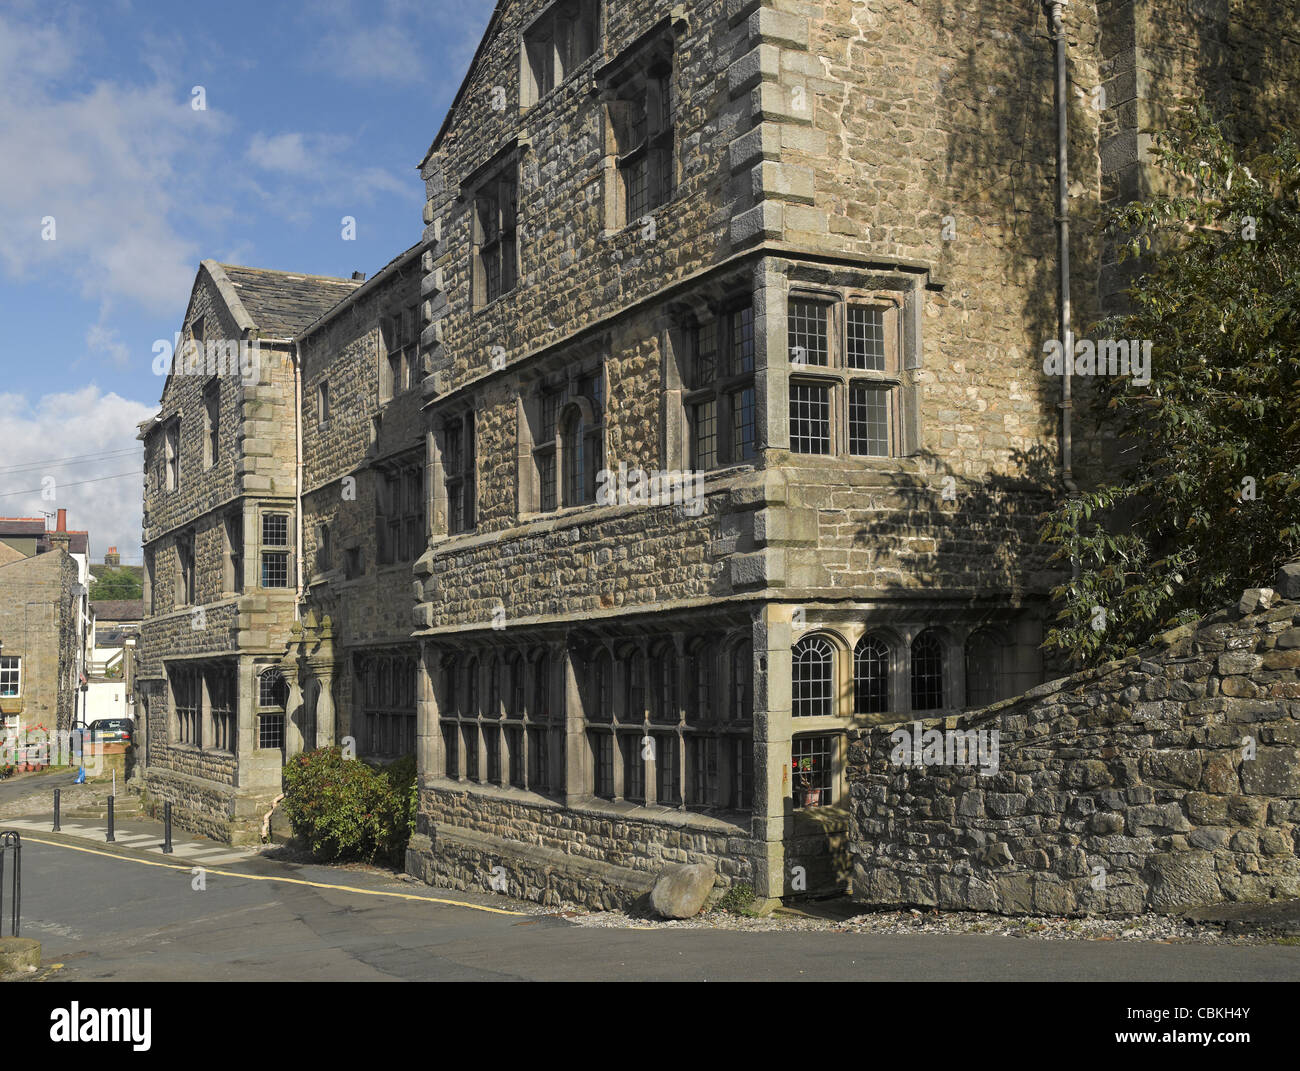 The Folly Settle Ribblesdale Yorkshire Dales North Yorkshire England UK United Kingdom GB Great Britain Stock Photo